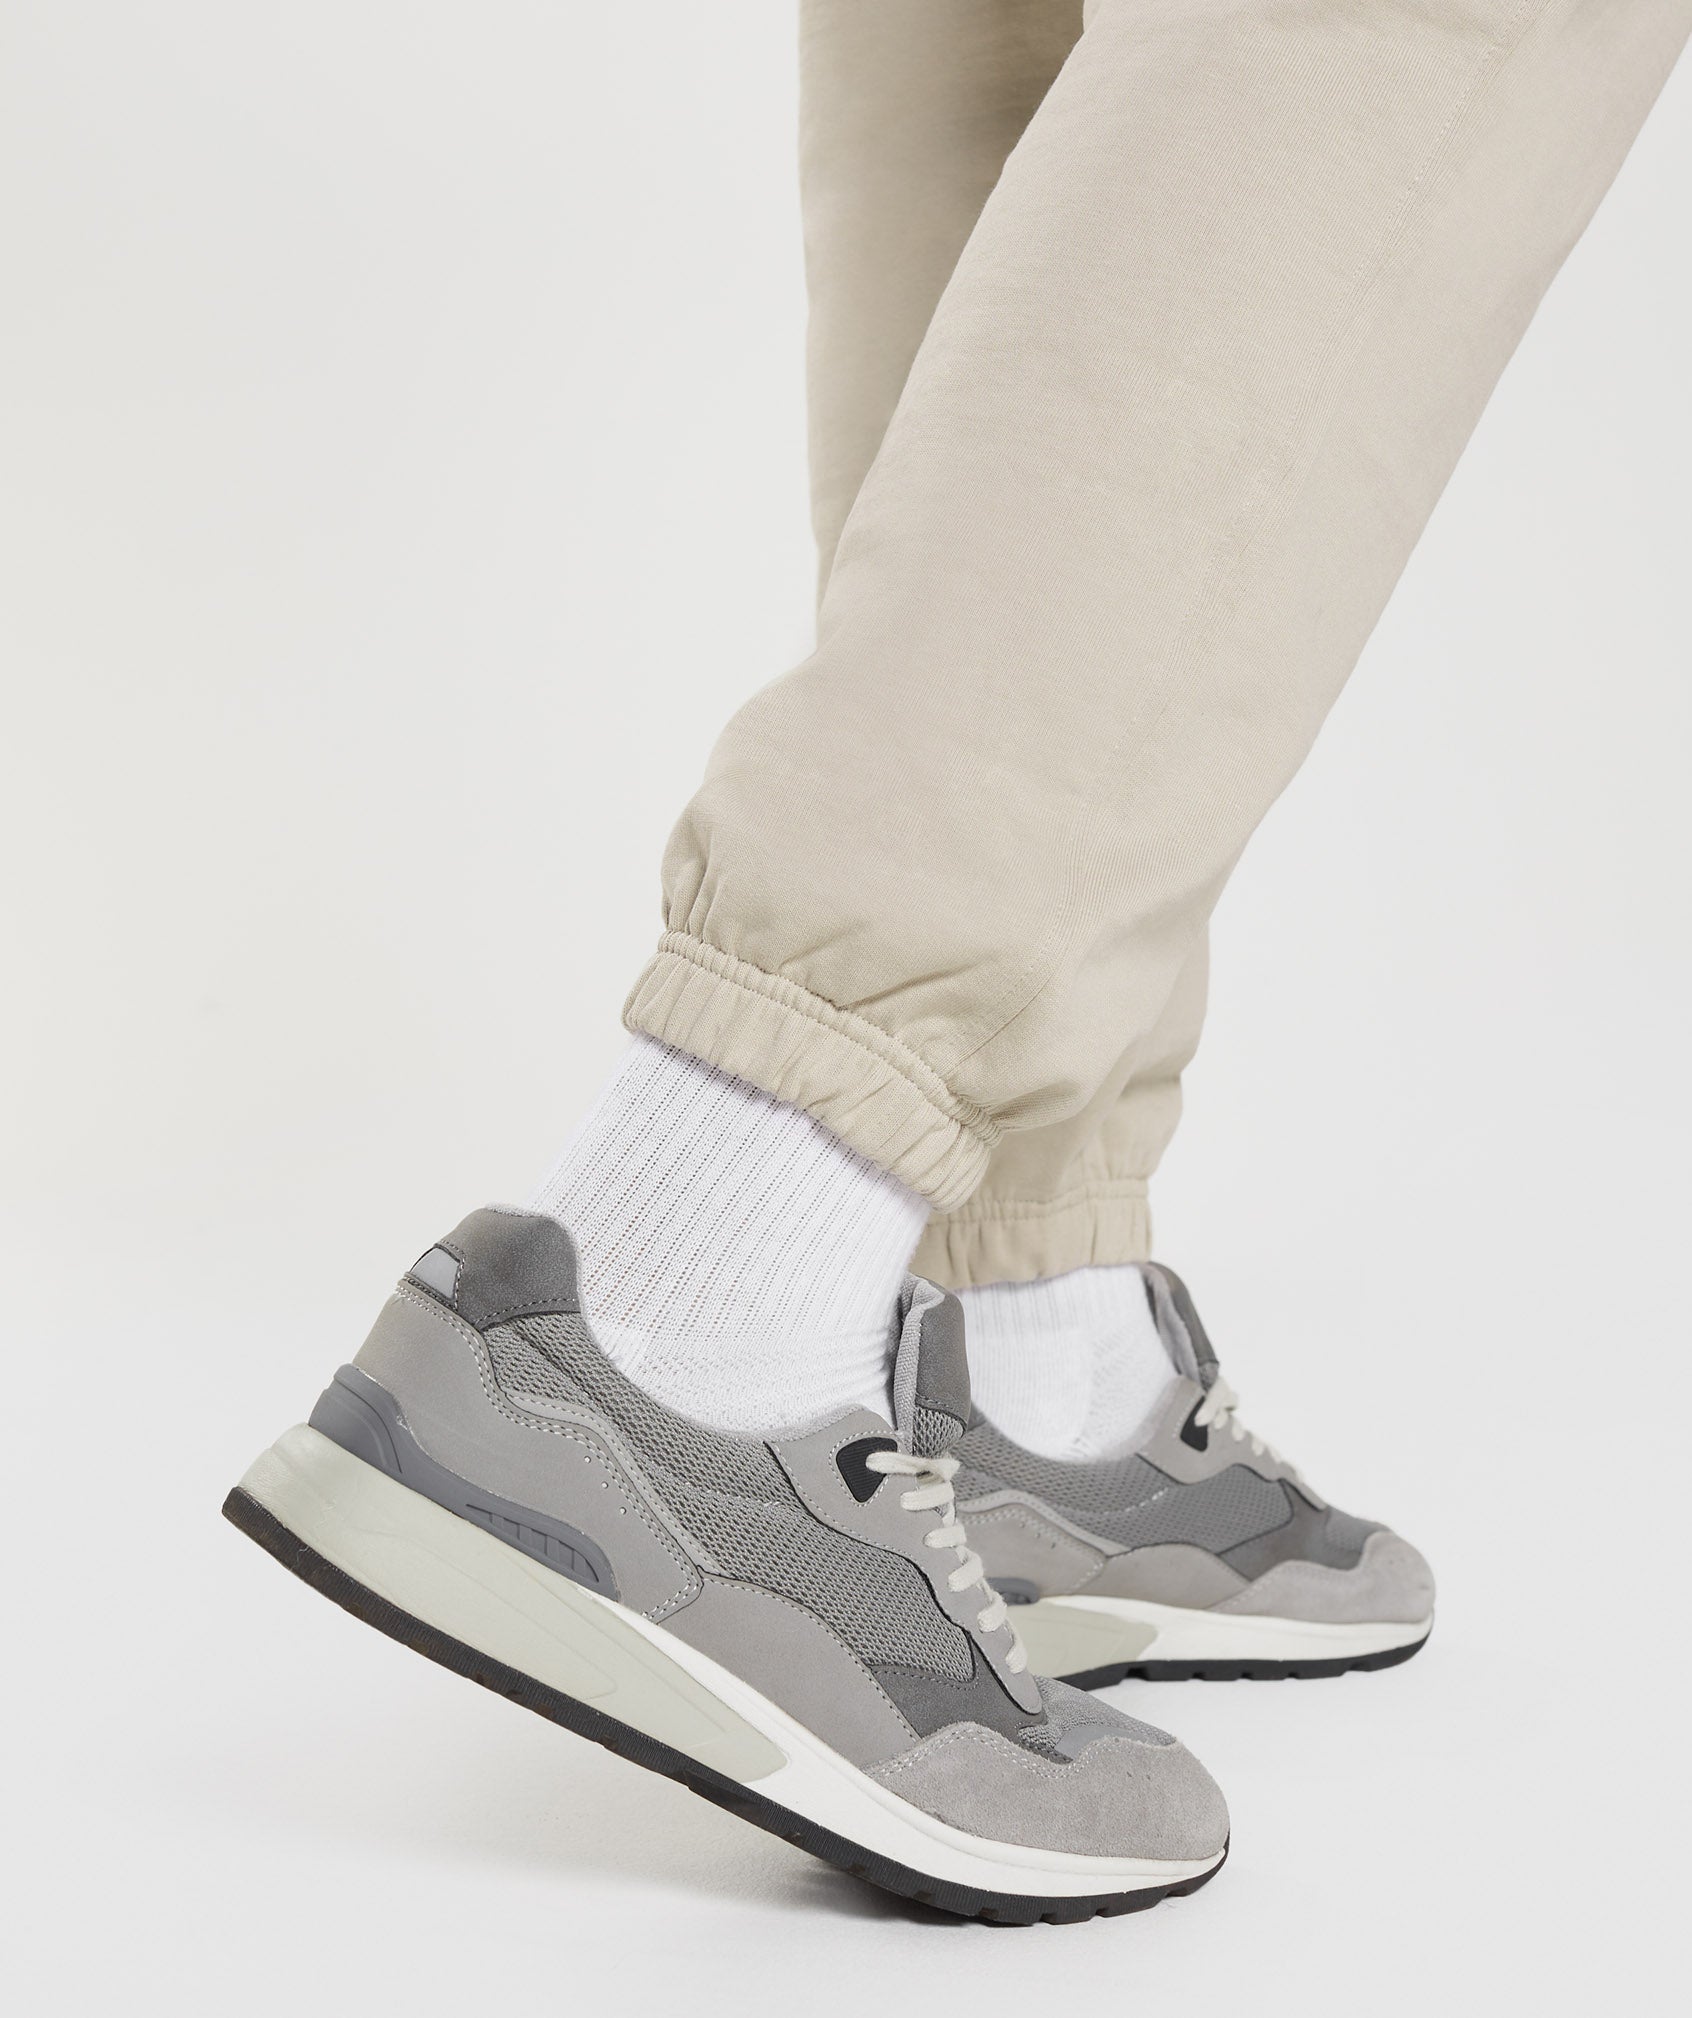 Rest Day Sweats Joggers in Pebble Grey - view 8